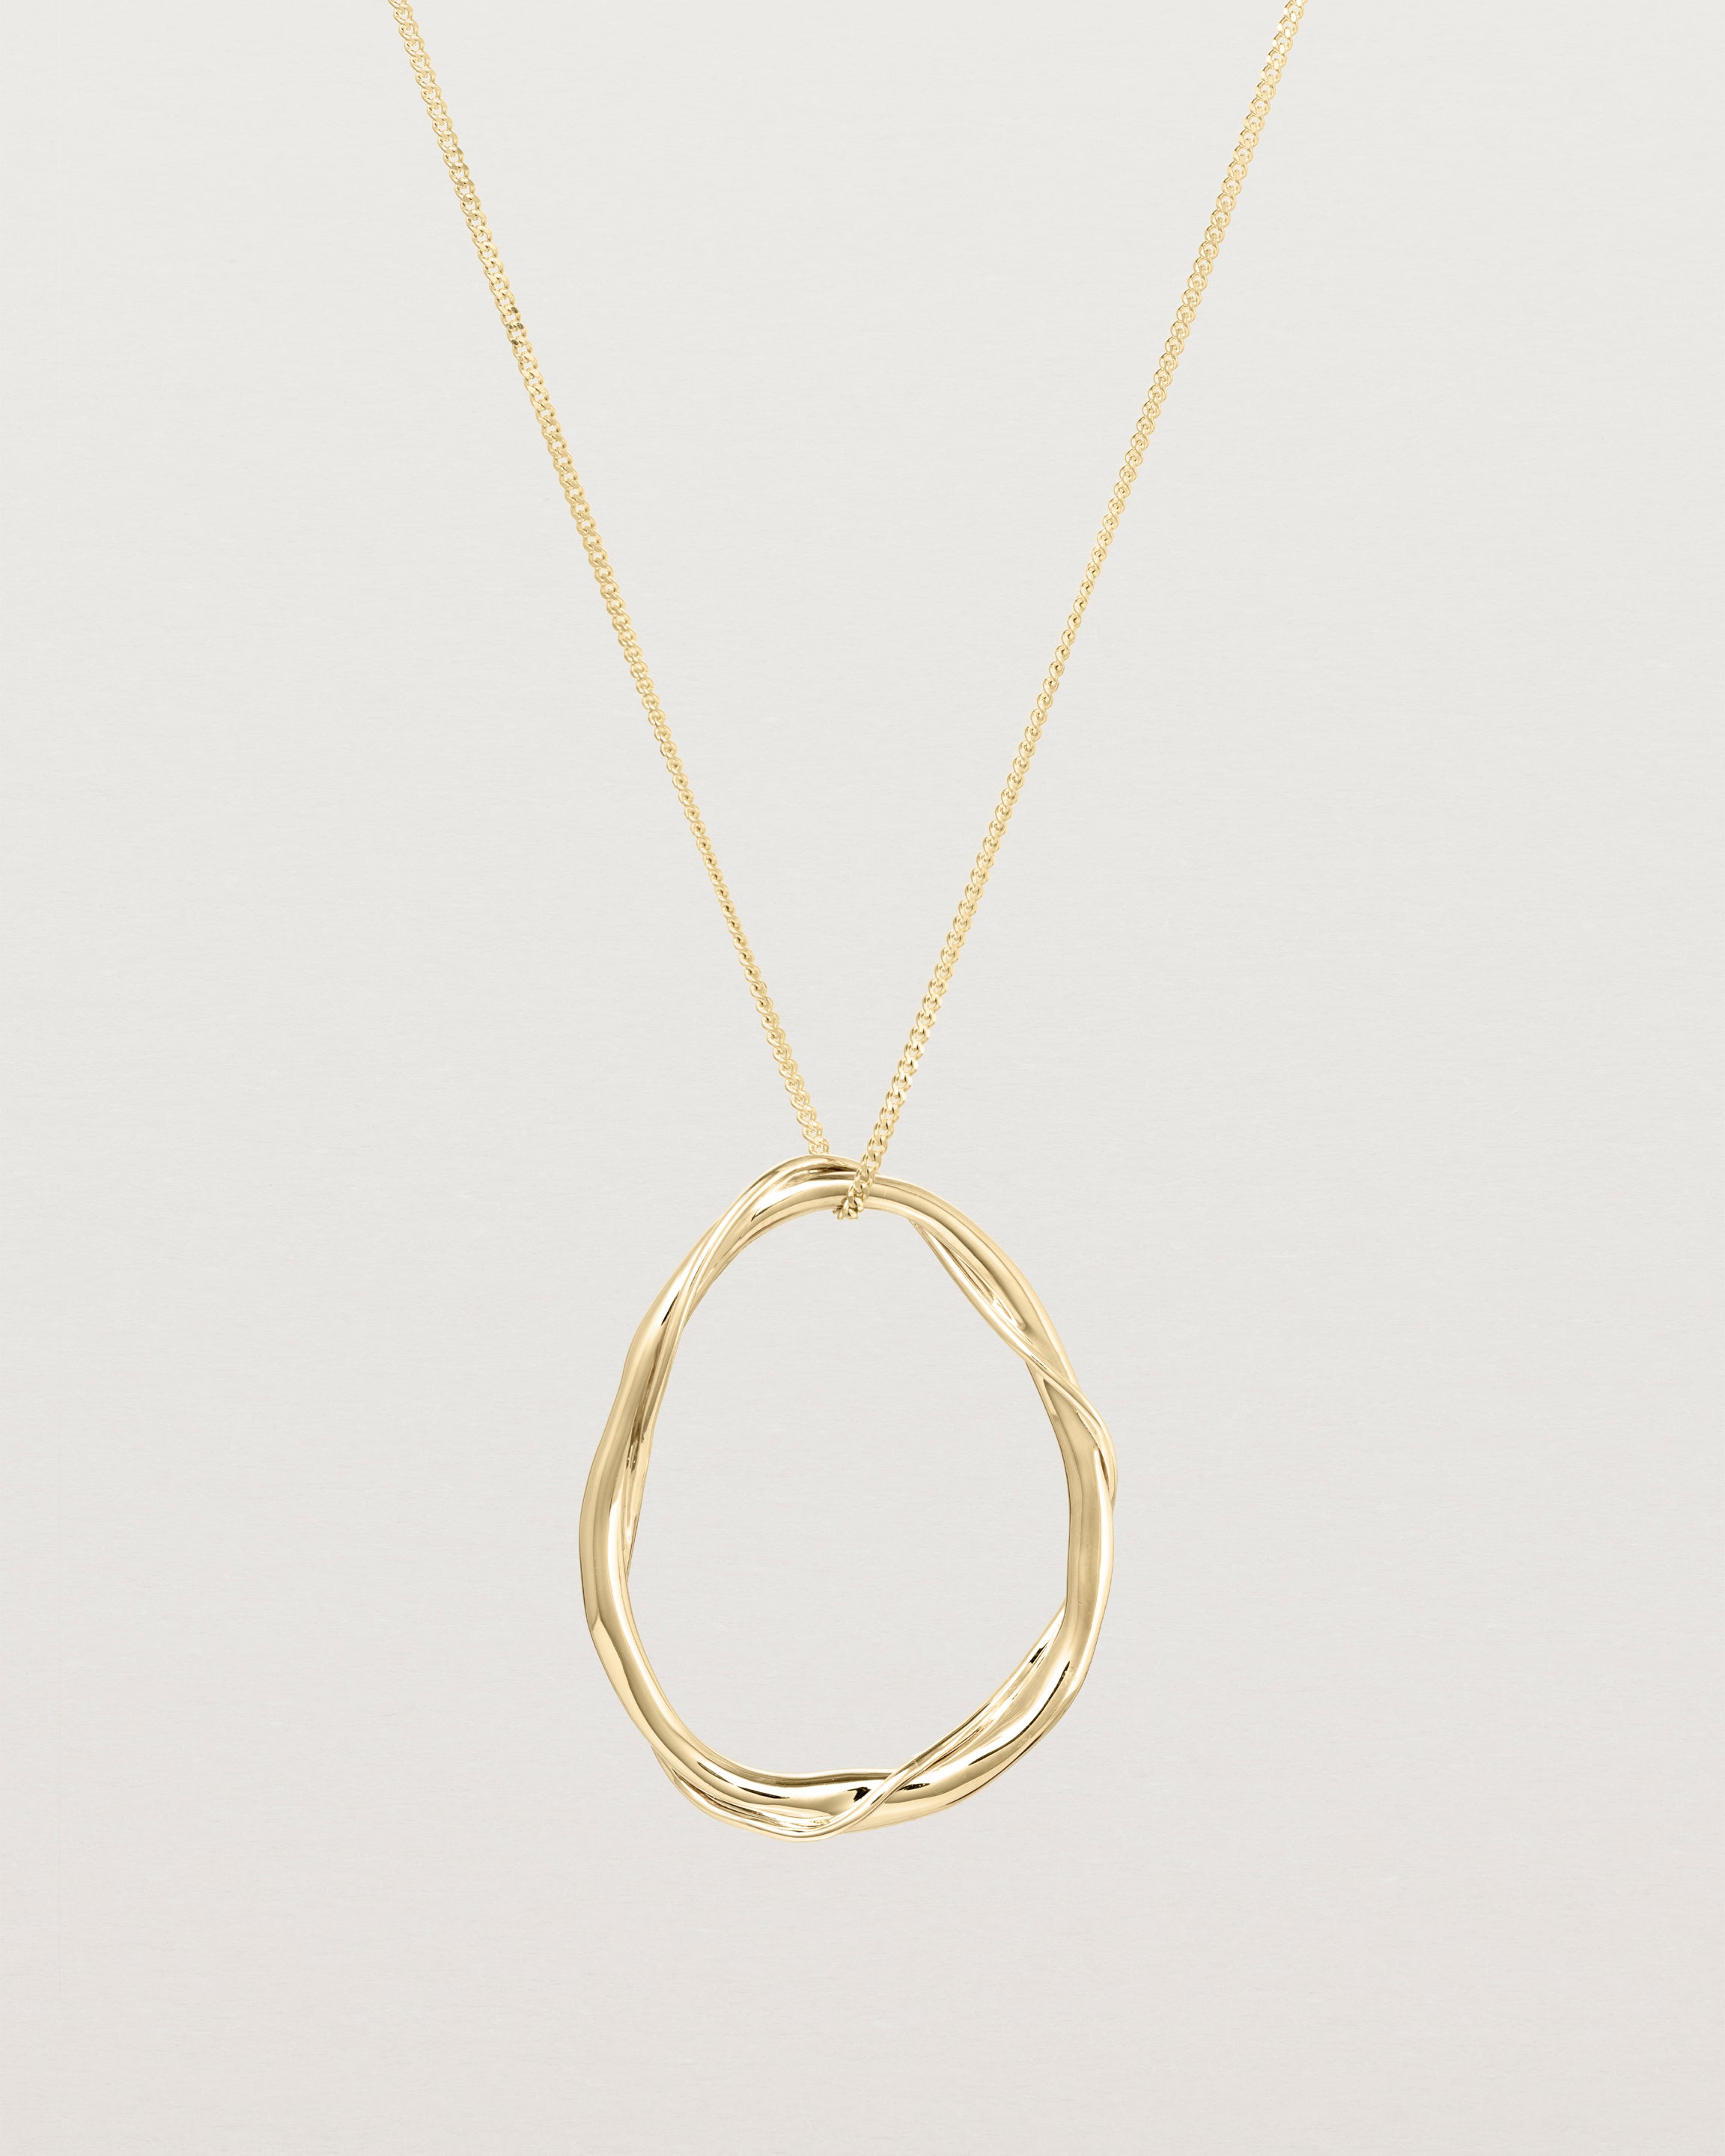 Front view of the Dalí Necklace in yellow gold.